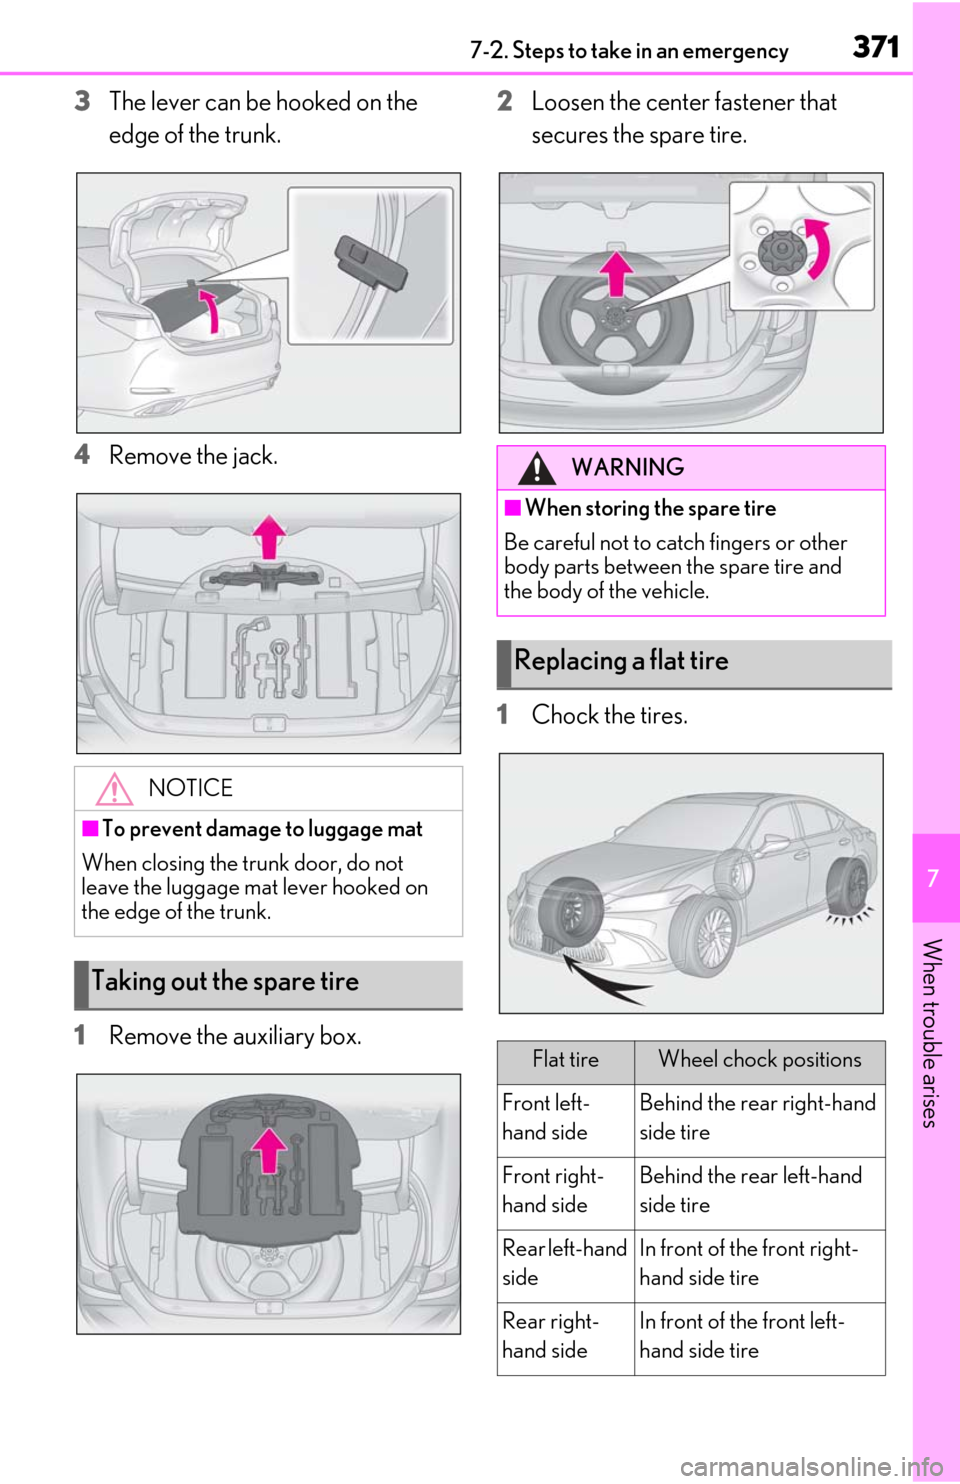 Lexus ES350 2020  Owners Manuals / LEXUS 2020 ES350 THROUGH SEPT. 2019 PROD. OWNERS MANUAL (OM06174U) 3717-2. Steps to take in an emergency
7
When trouble arises
3The lever can be hooked on the 
edge of the trunk.
4
Remove the jack.
1
Remove the auxiliary box. 2
Loosen the center fastener that 
secure